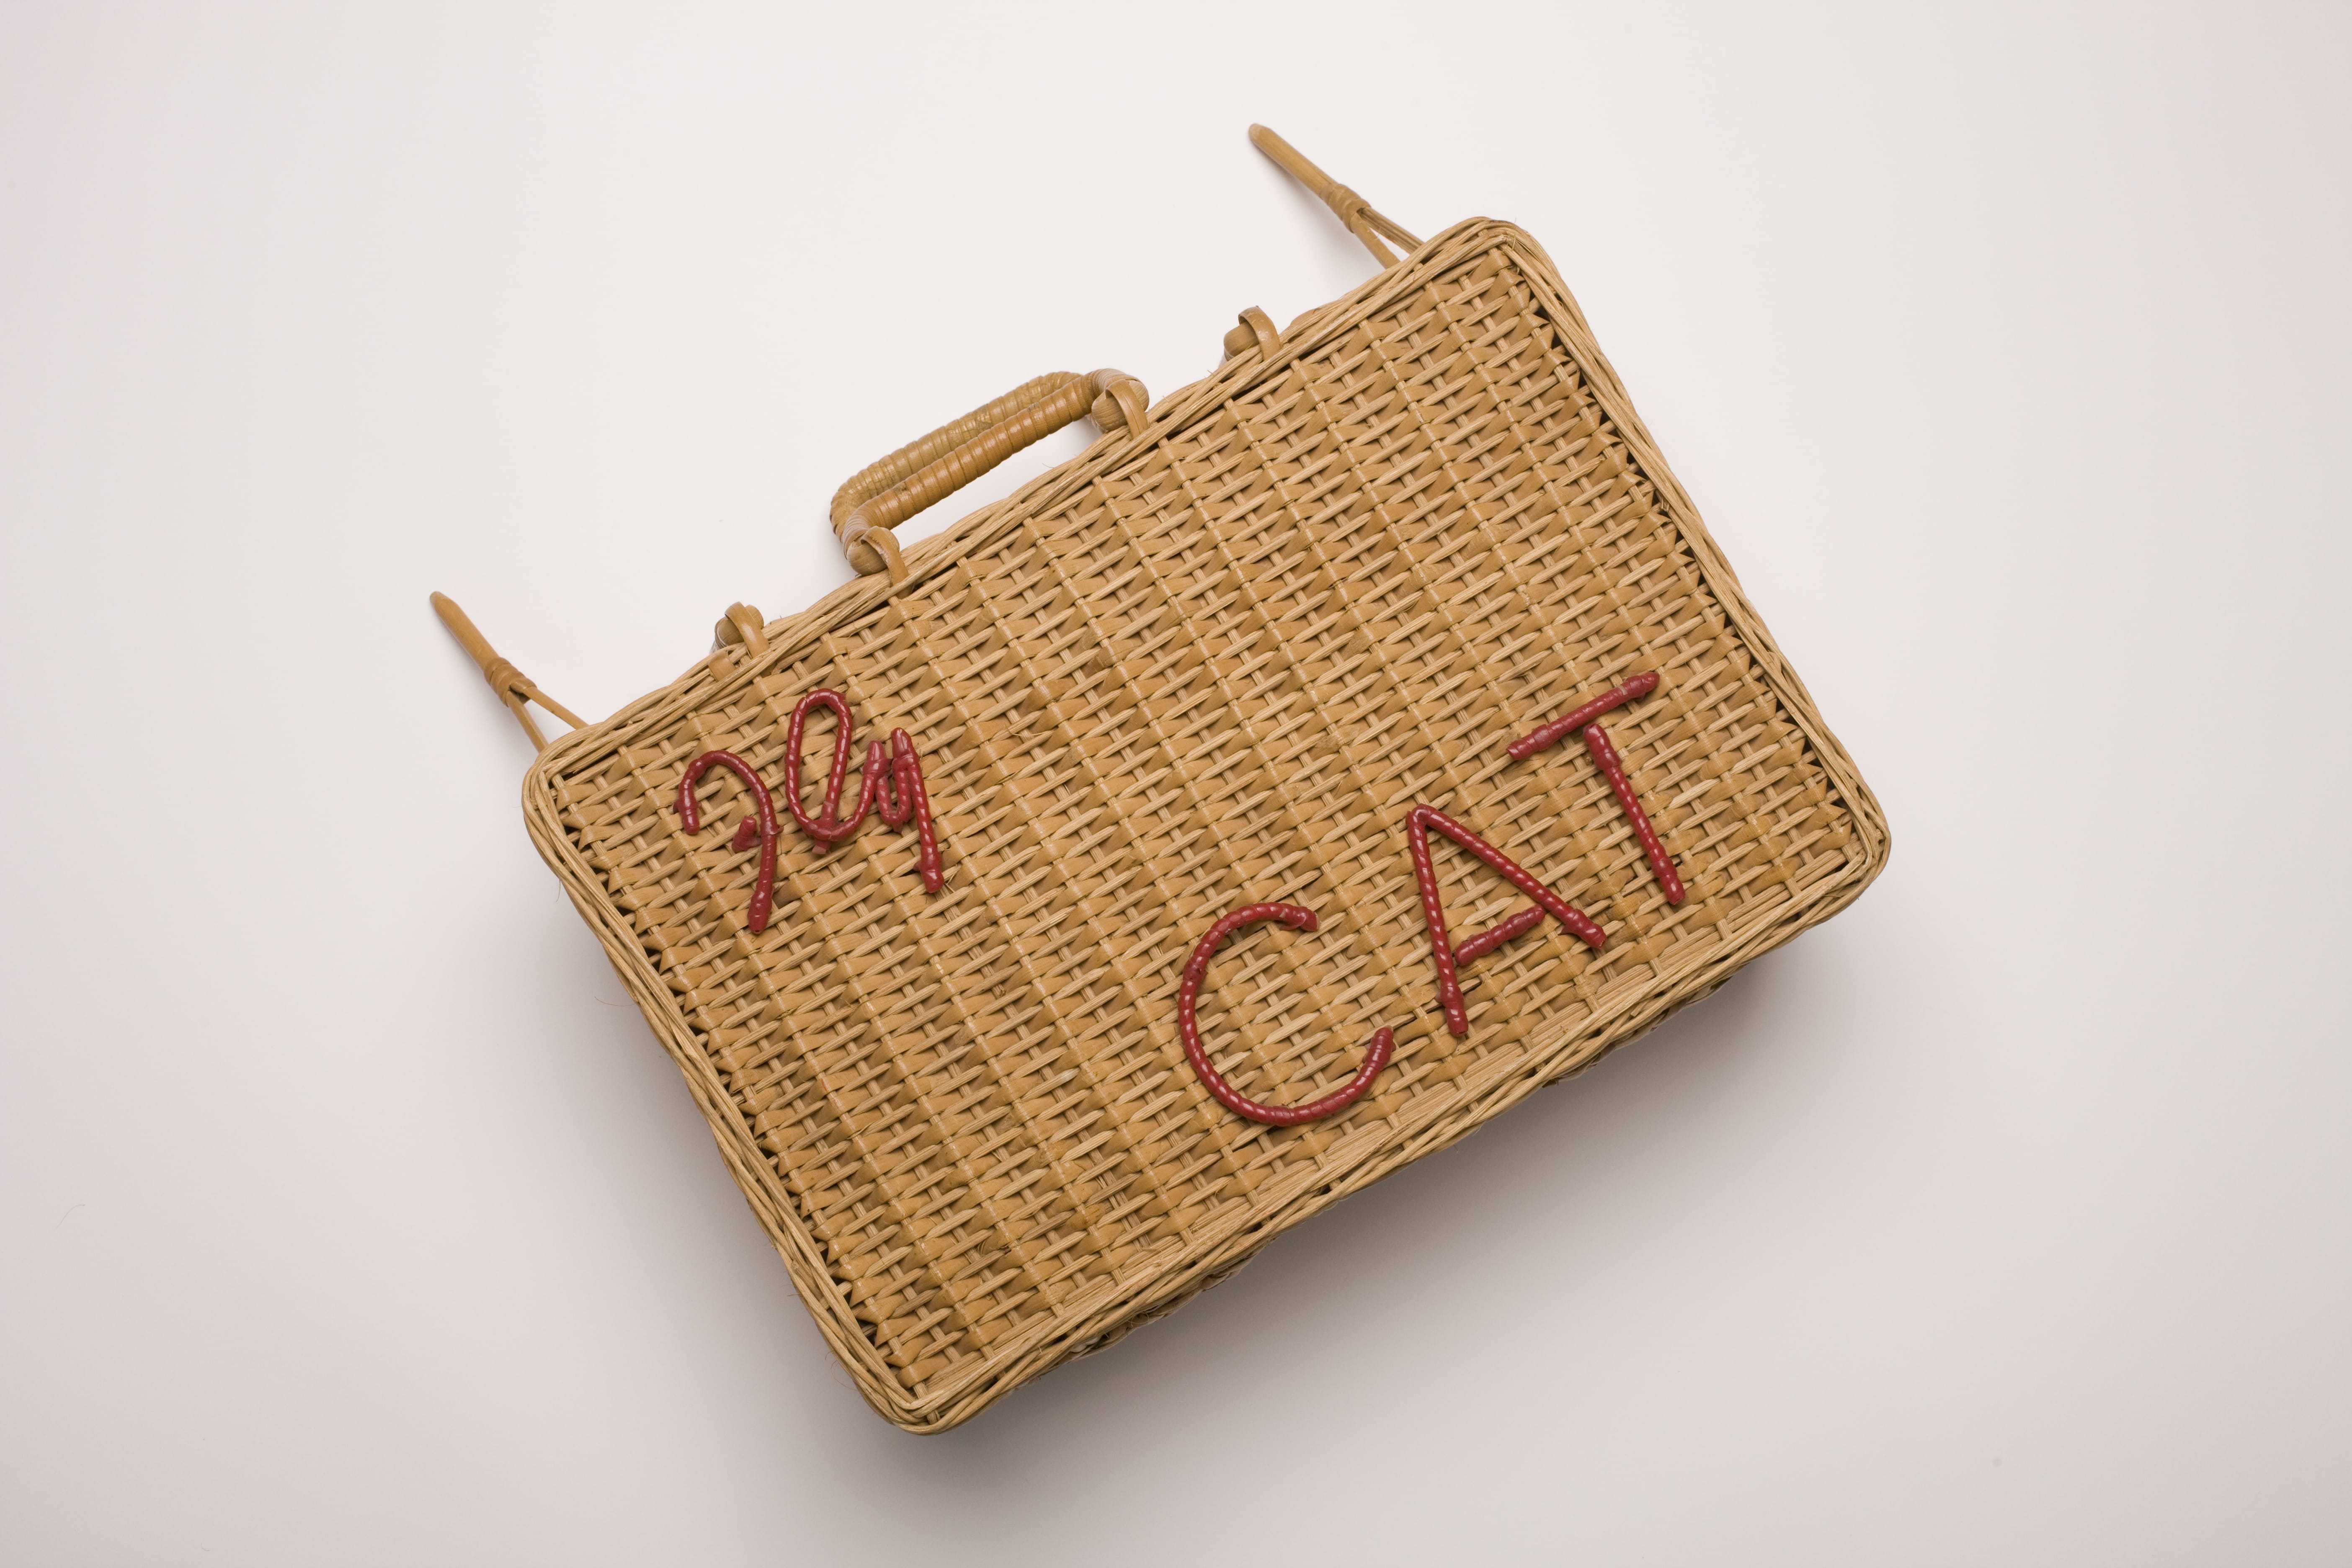 A wicker basket with the phrase "fly CAT" woven in red on the front